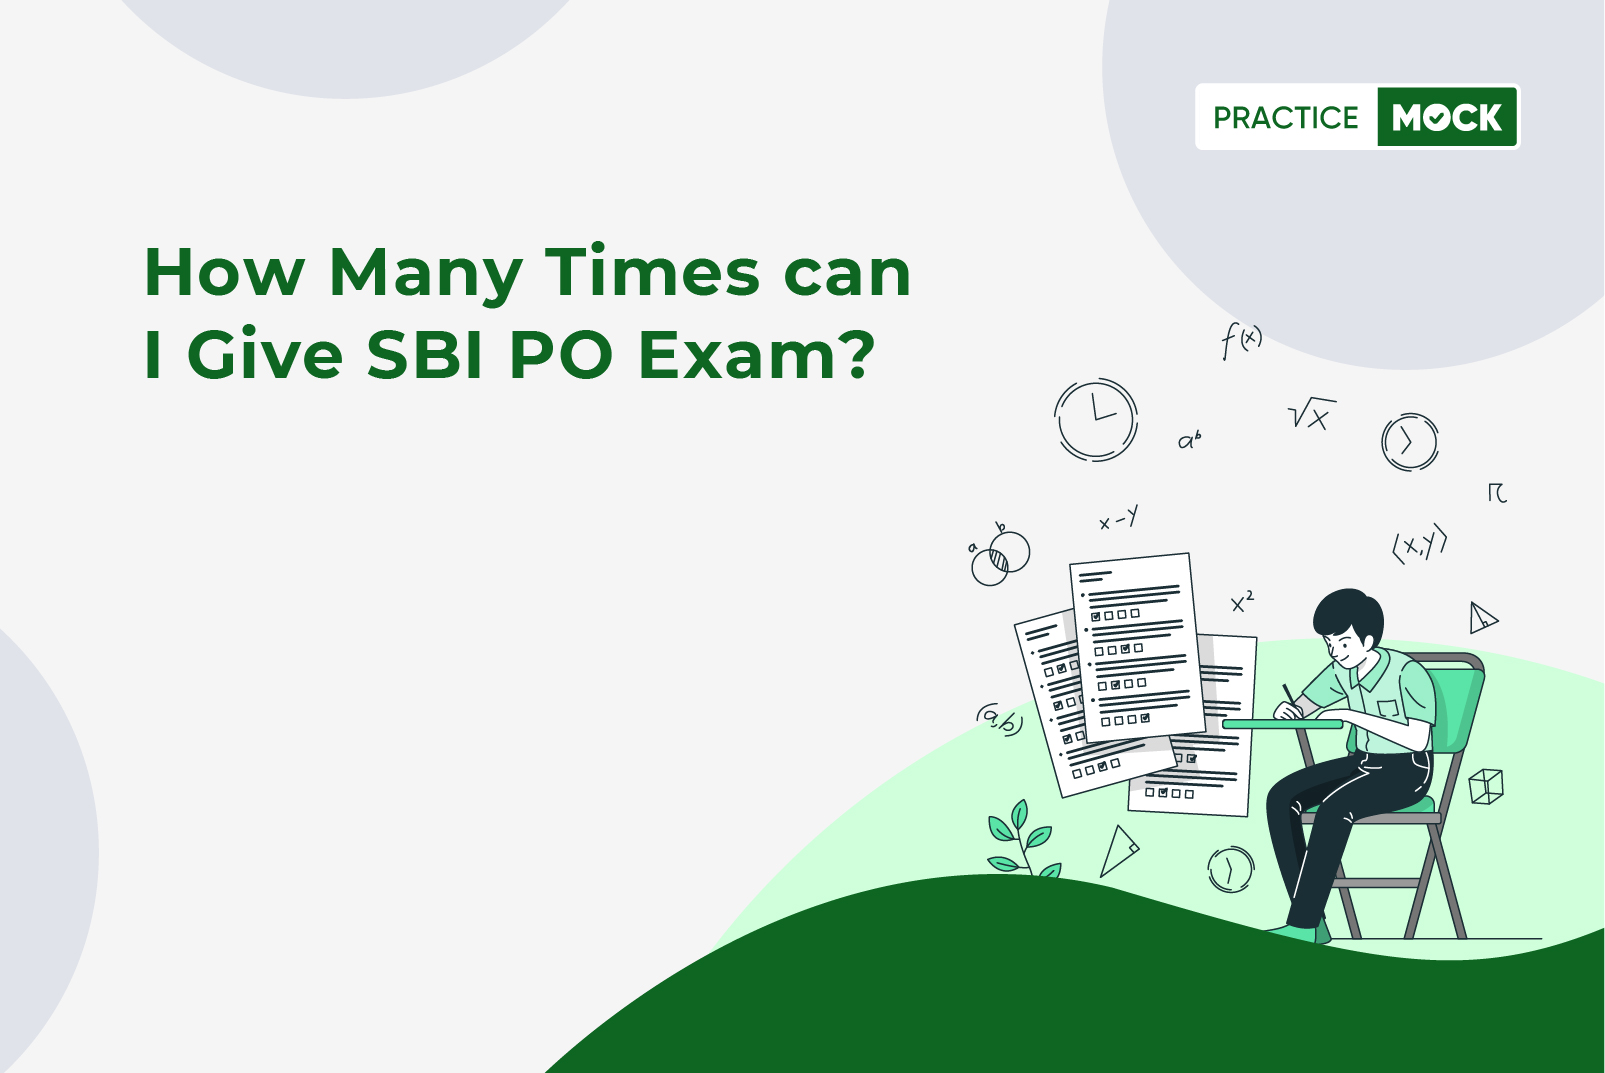 How many times can I give SBI PO Exam?